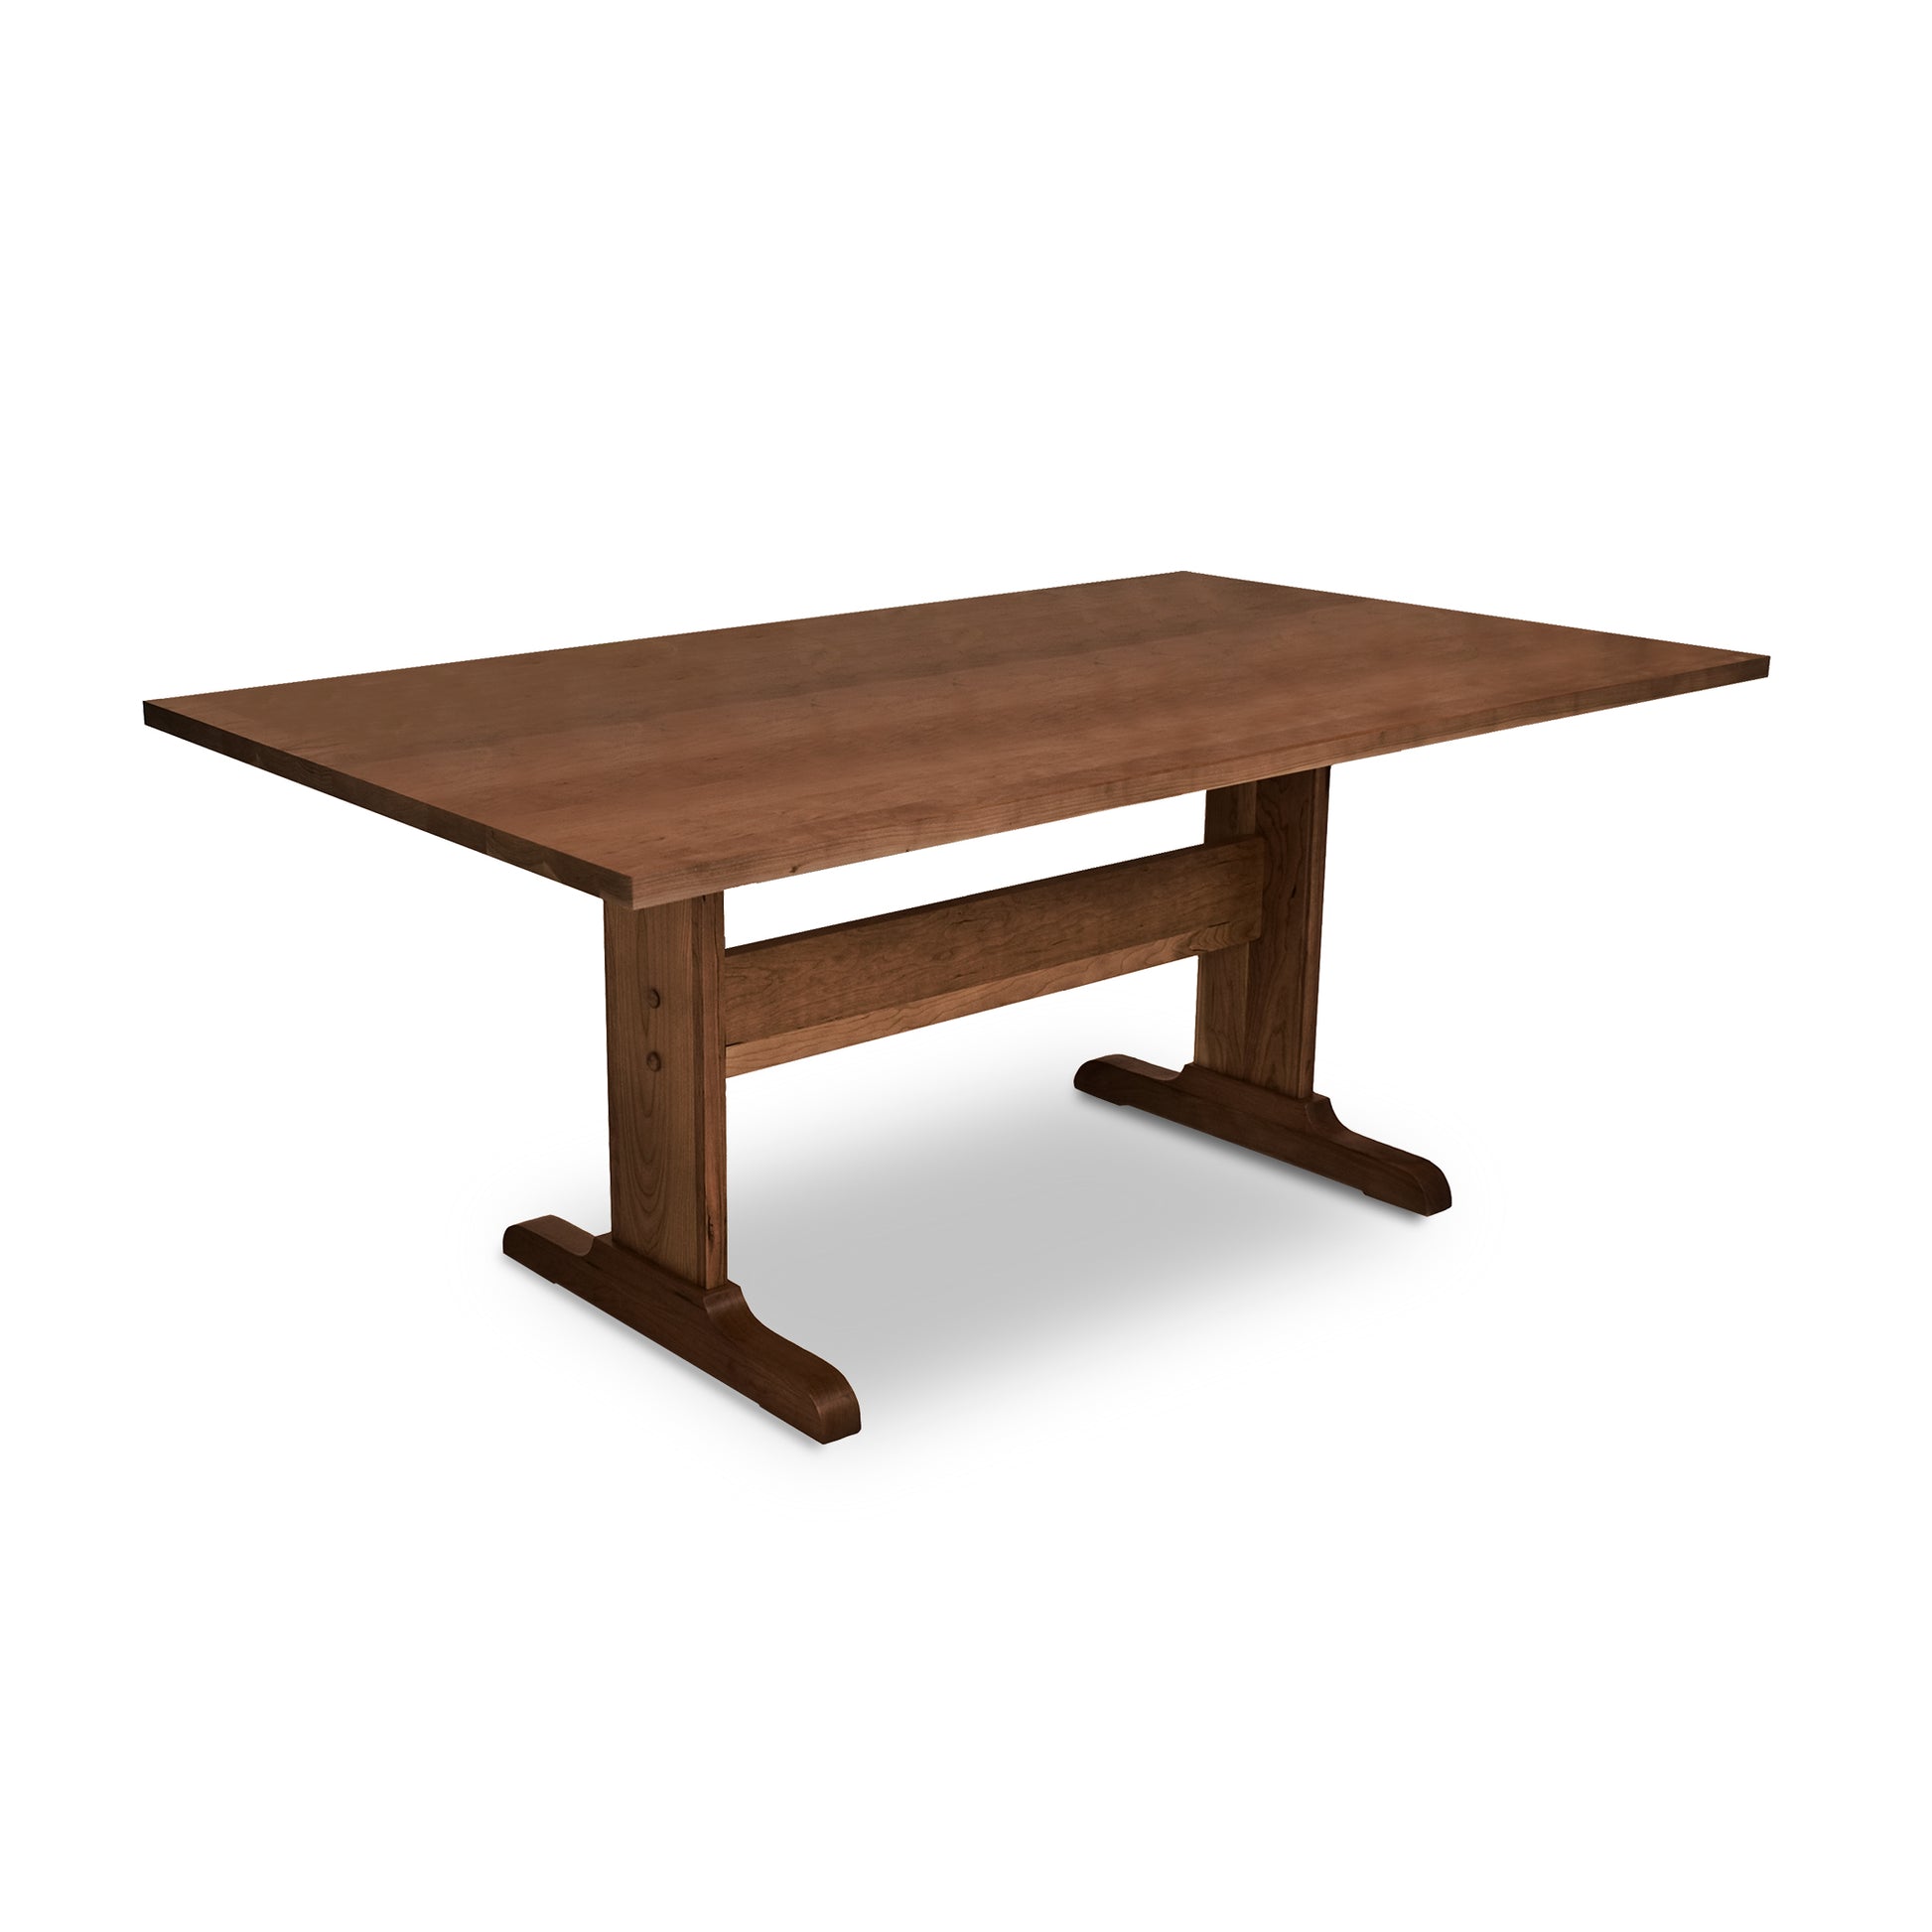 An eco-friendly Rectangular Trestle Solid Top Table by Lyndon Furniture with sustainably harvested woods and two legs on a white background.